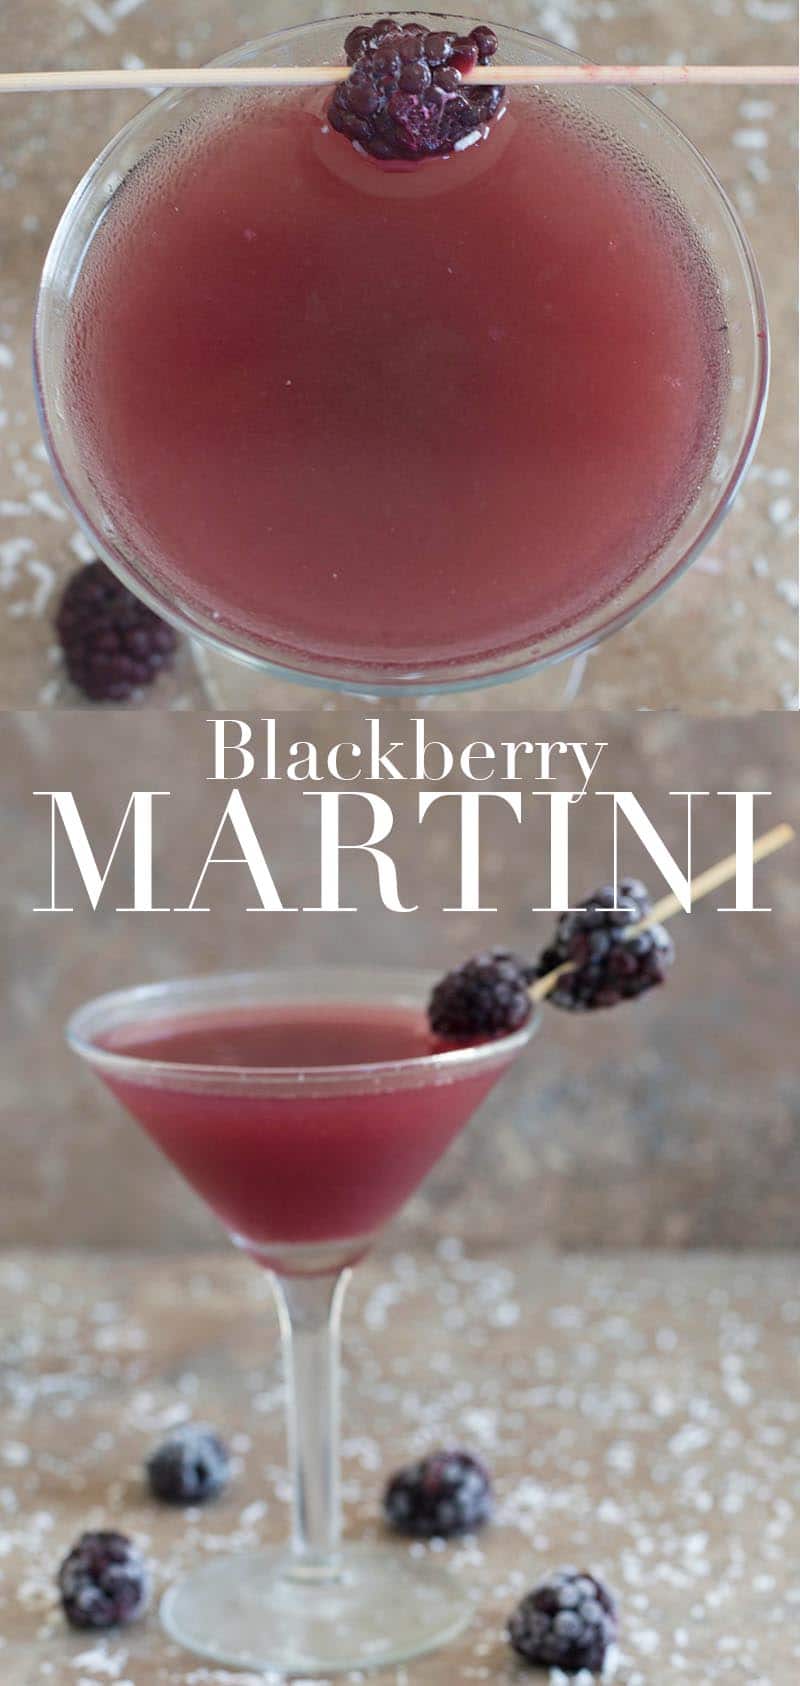 This blackberry martini is a gin martini recipe. I added coconut rum and pineapple juice. This martini should be on your New Year's Eve Cocktail